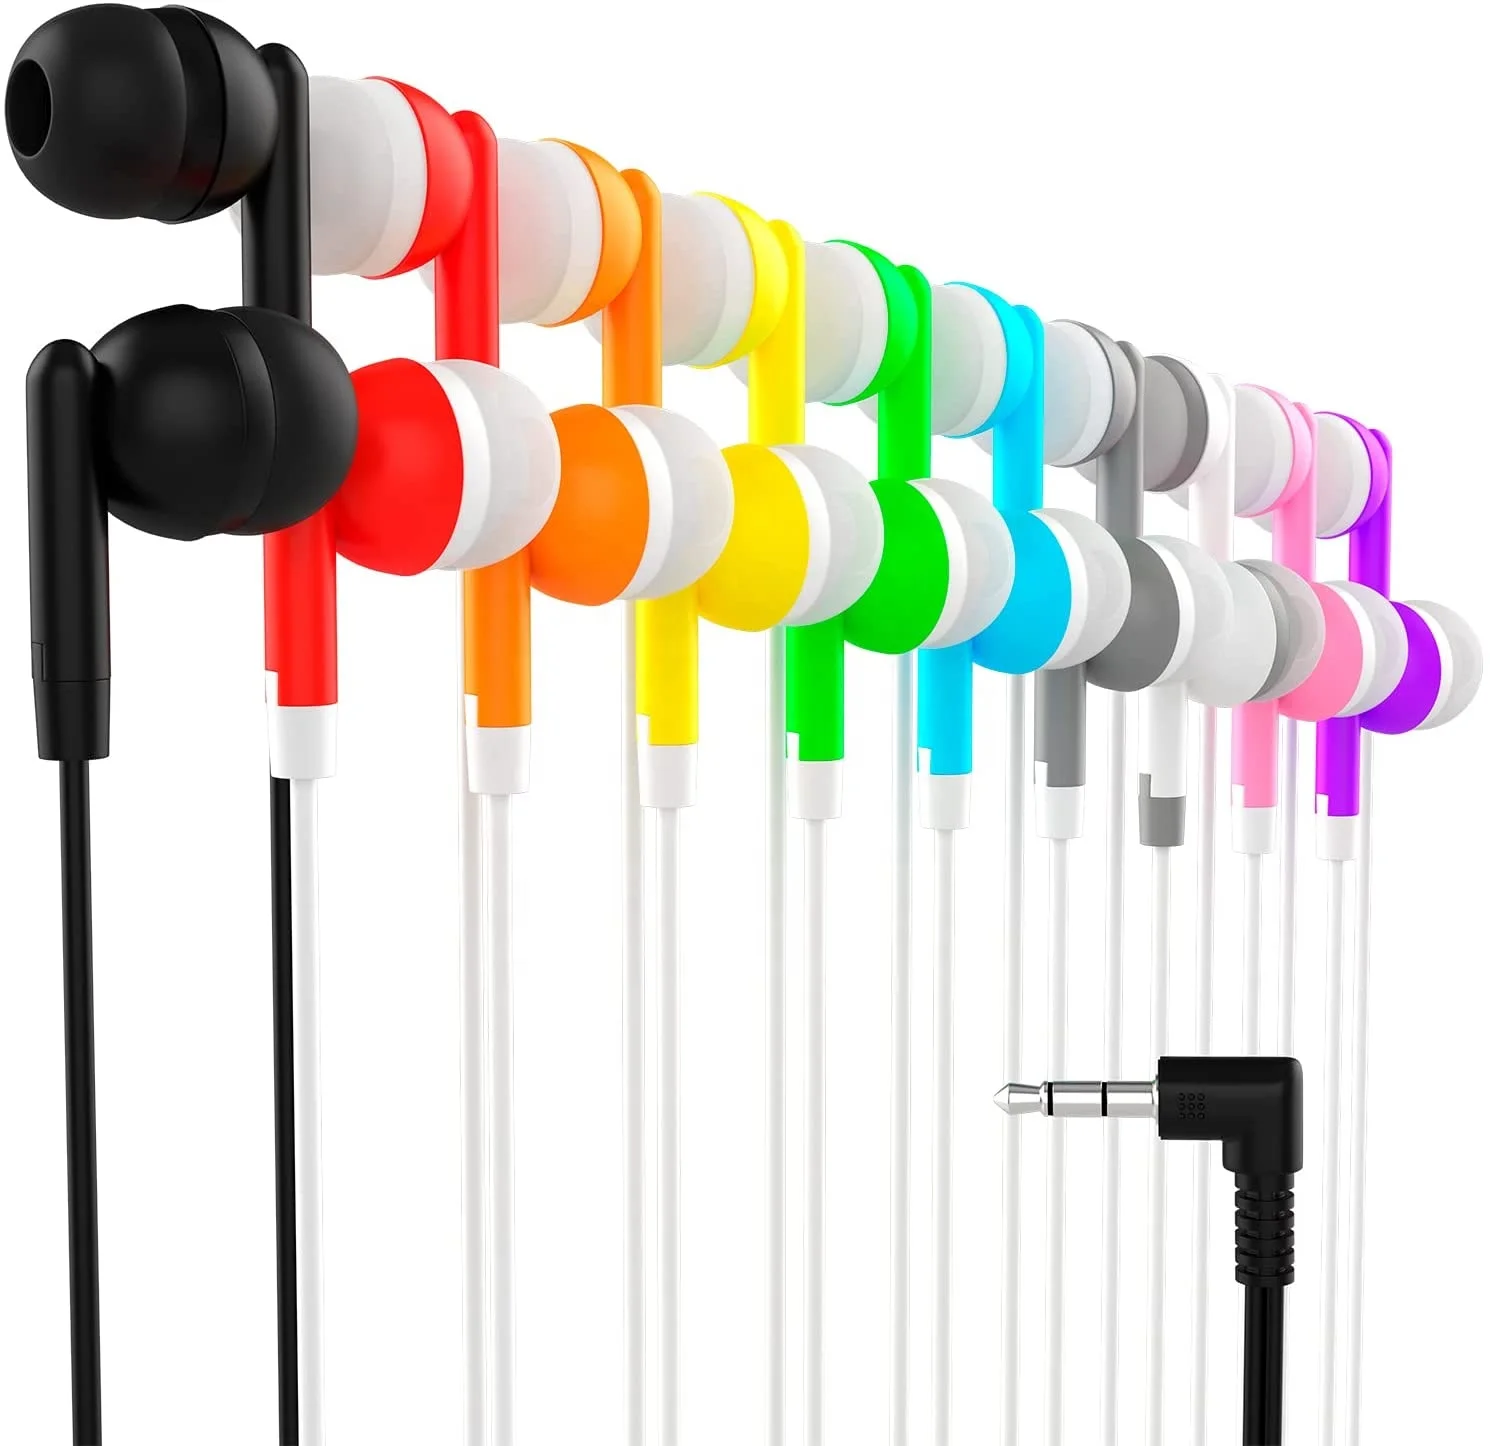 

Bulk Low Price Cheap Earpiece Disposable Earphone For Airline Aviation Headset Earbud Headphone Cheapest Promotional Earbuds